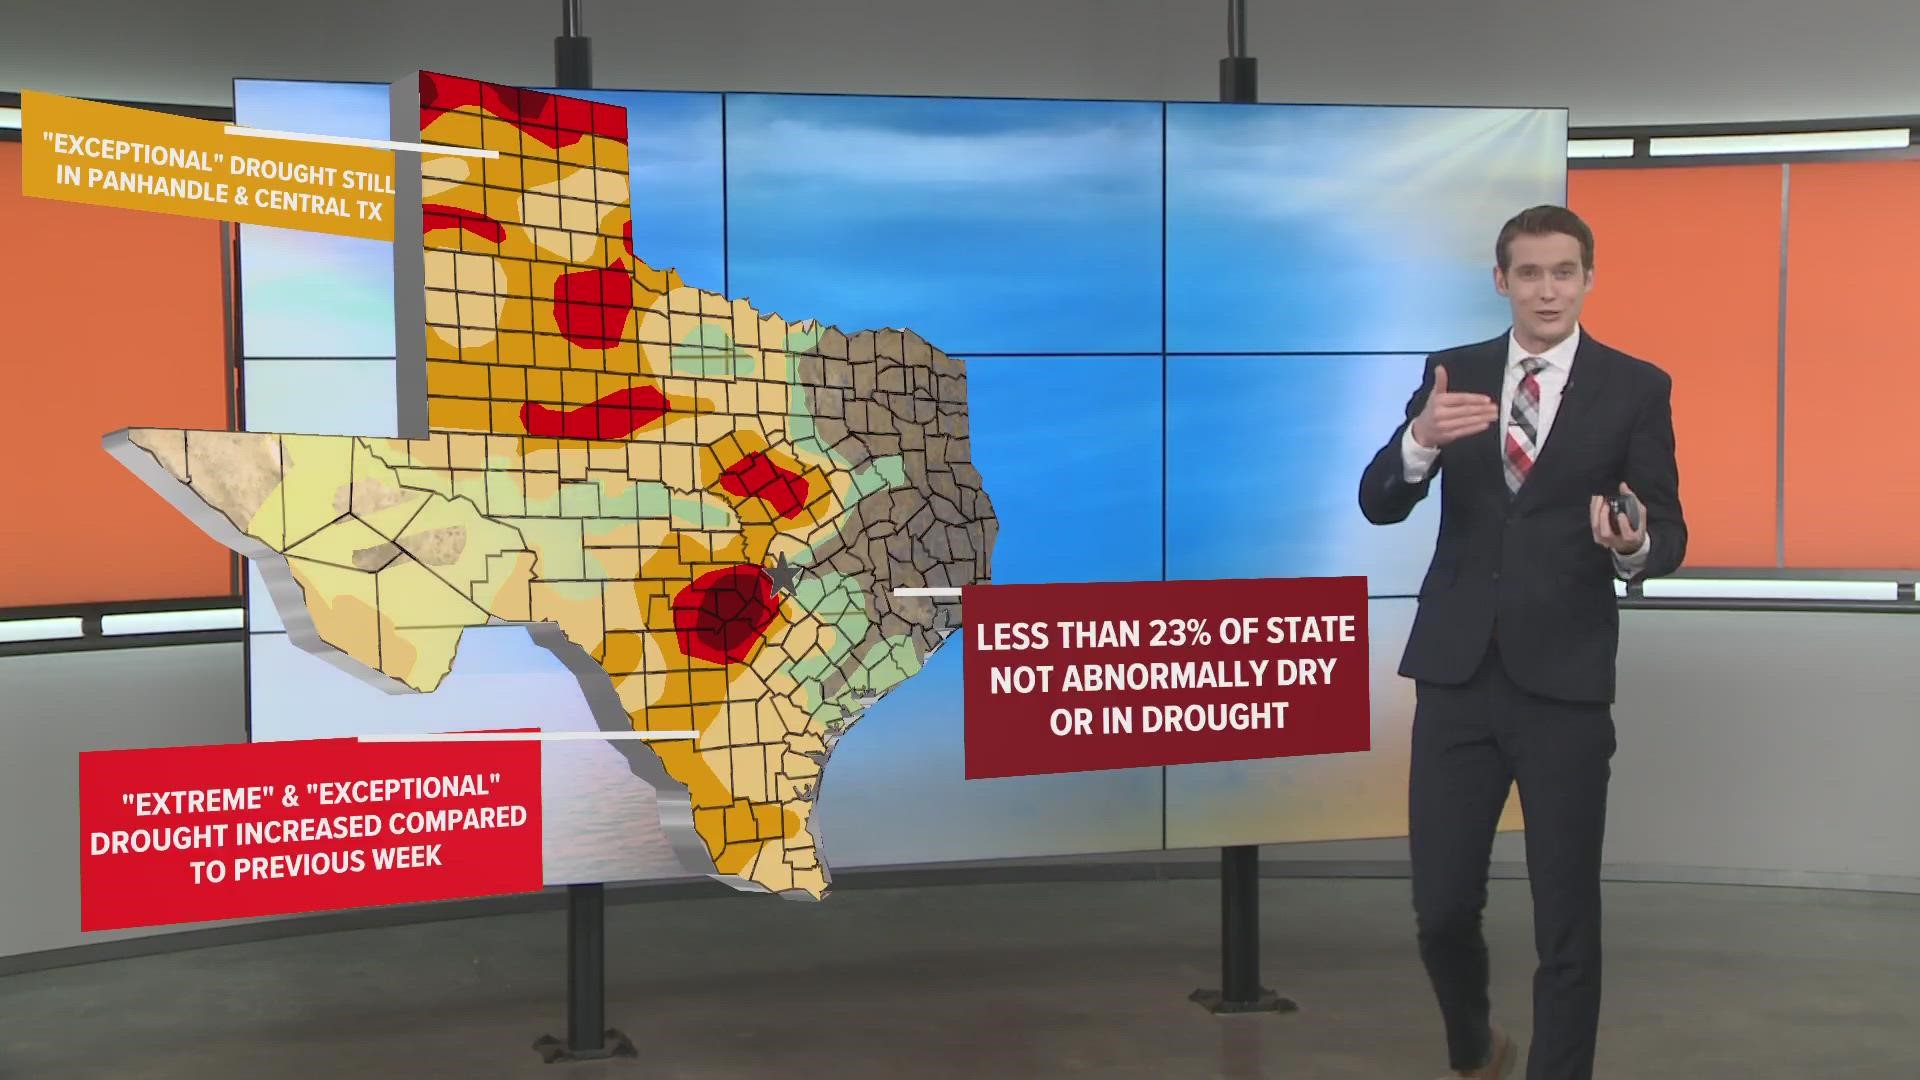 Recapping the new information on this week's drought monitor